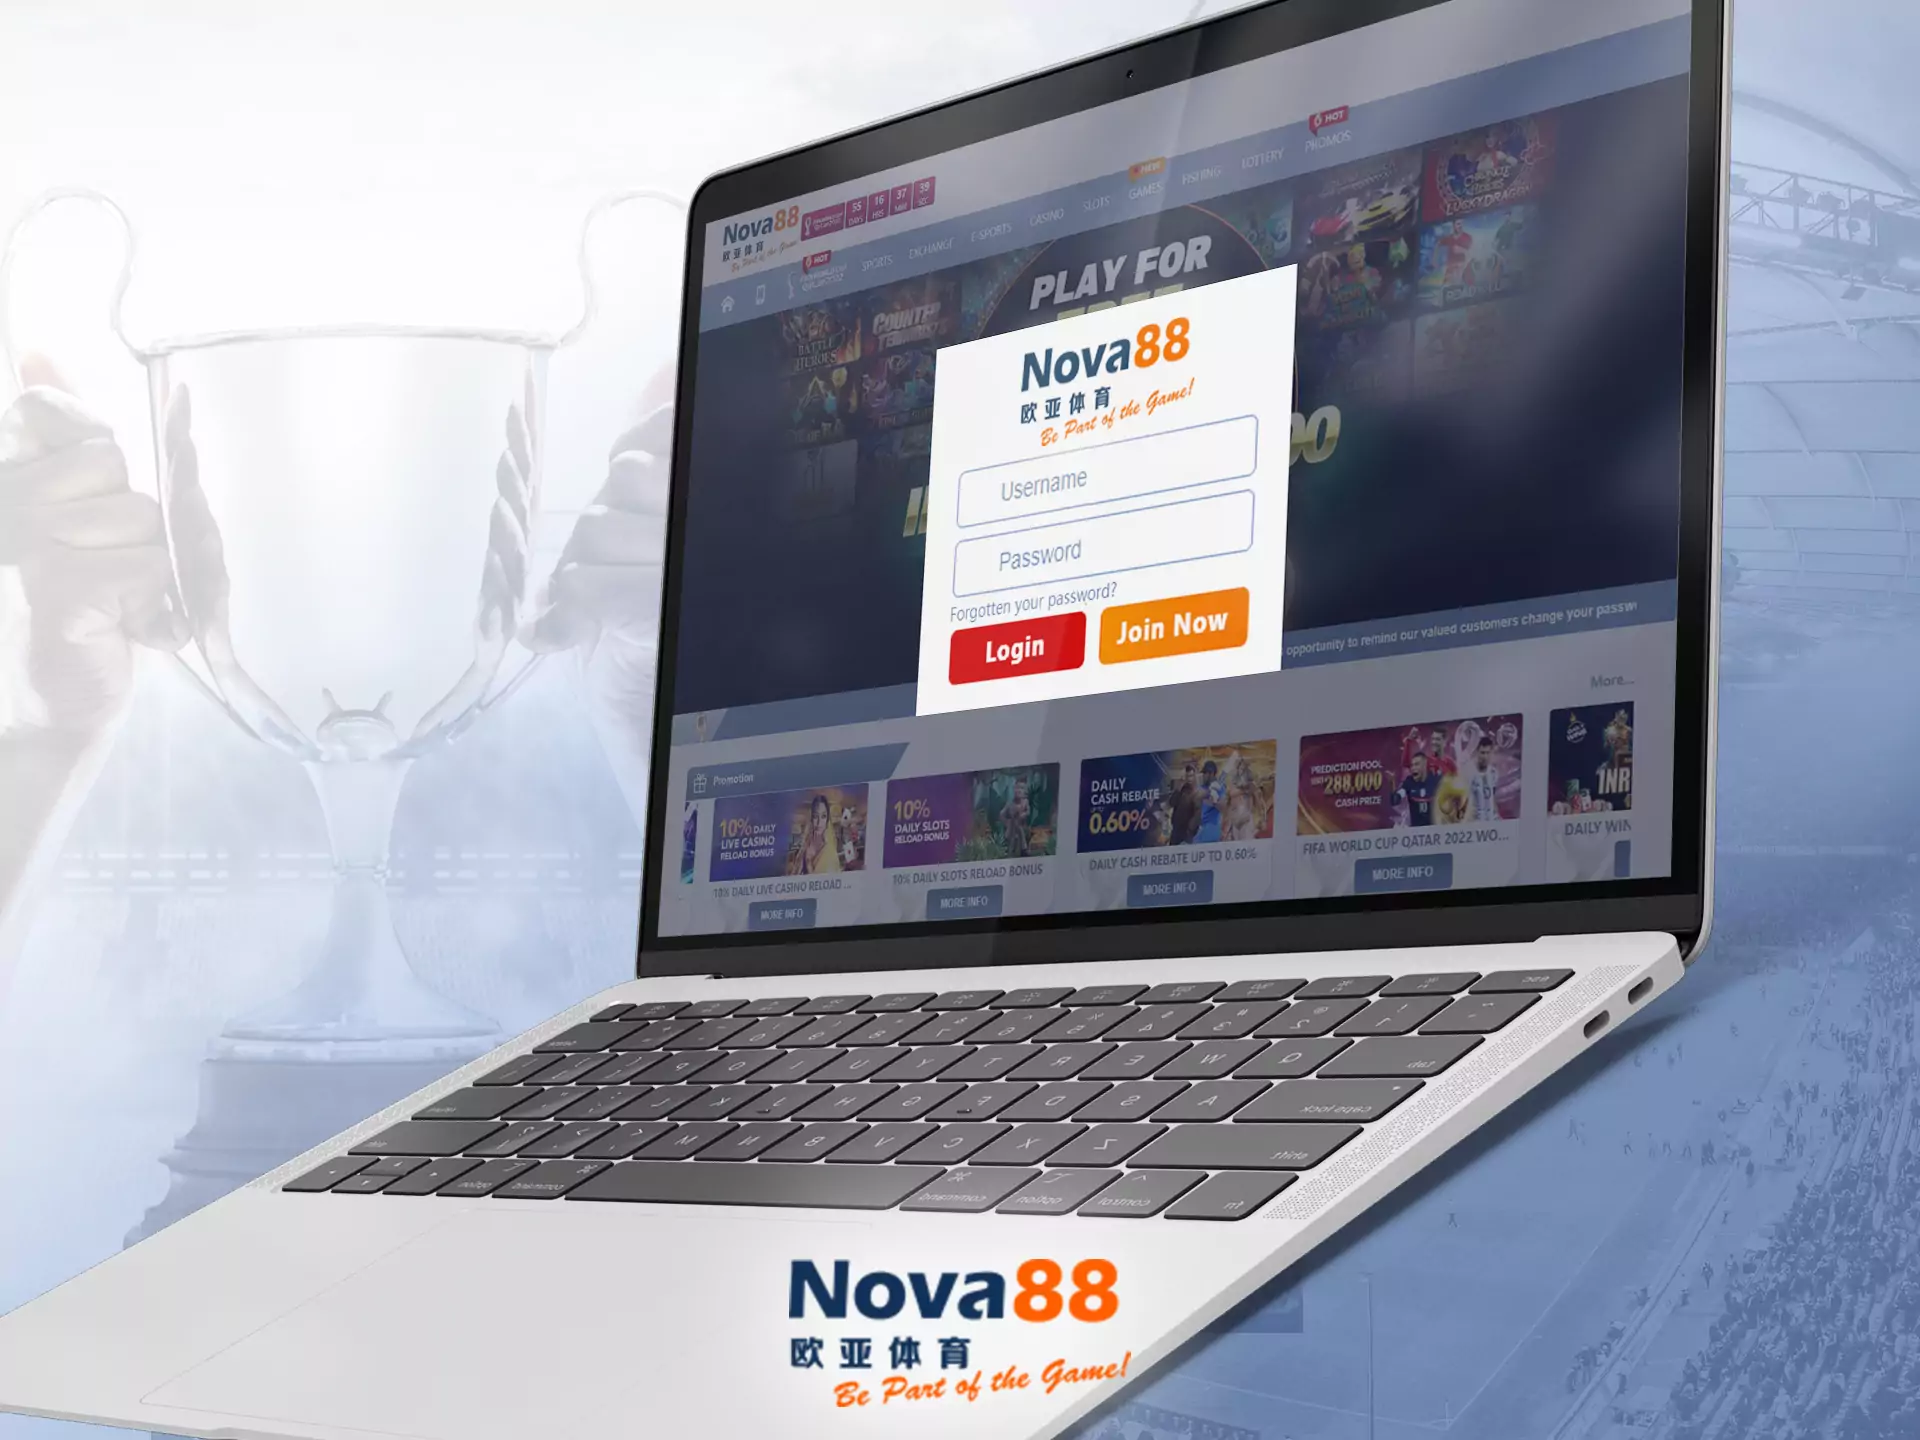 Use your username and password to log into the Nova88 account.